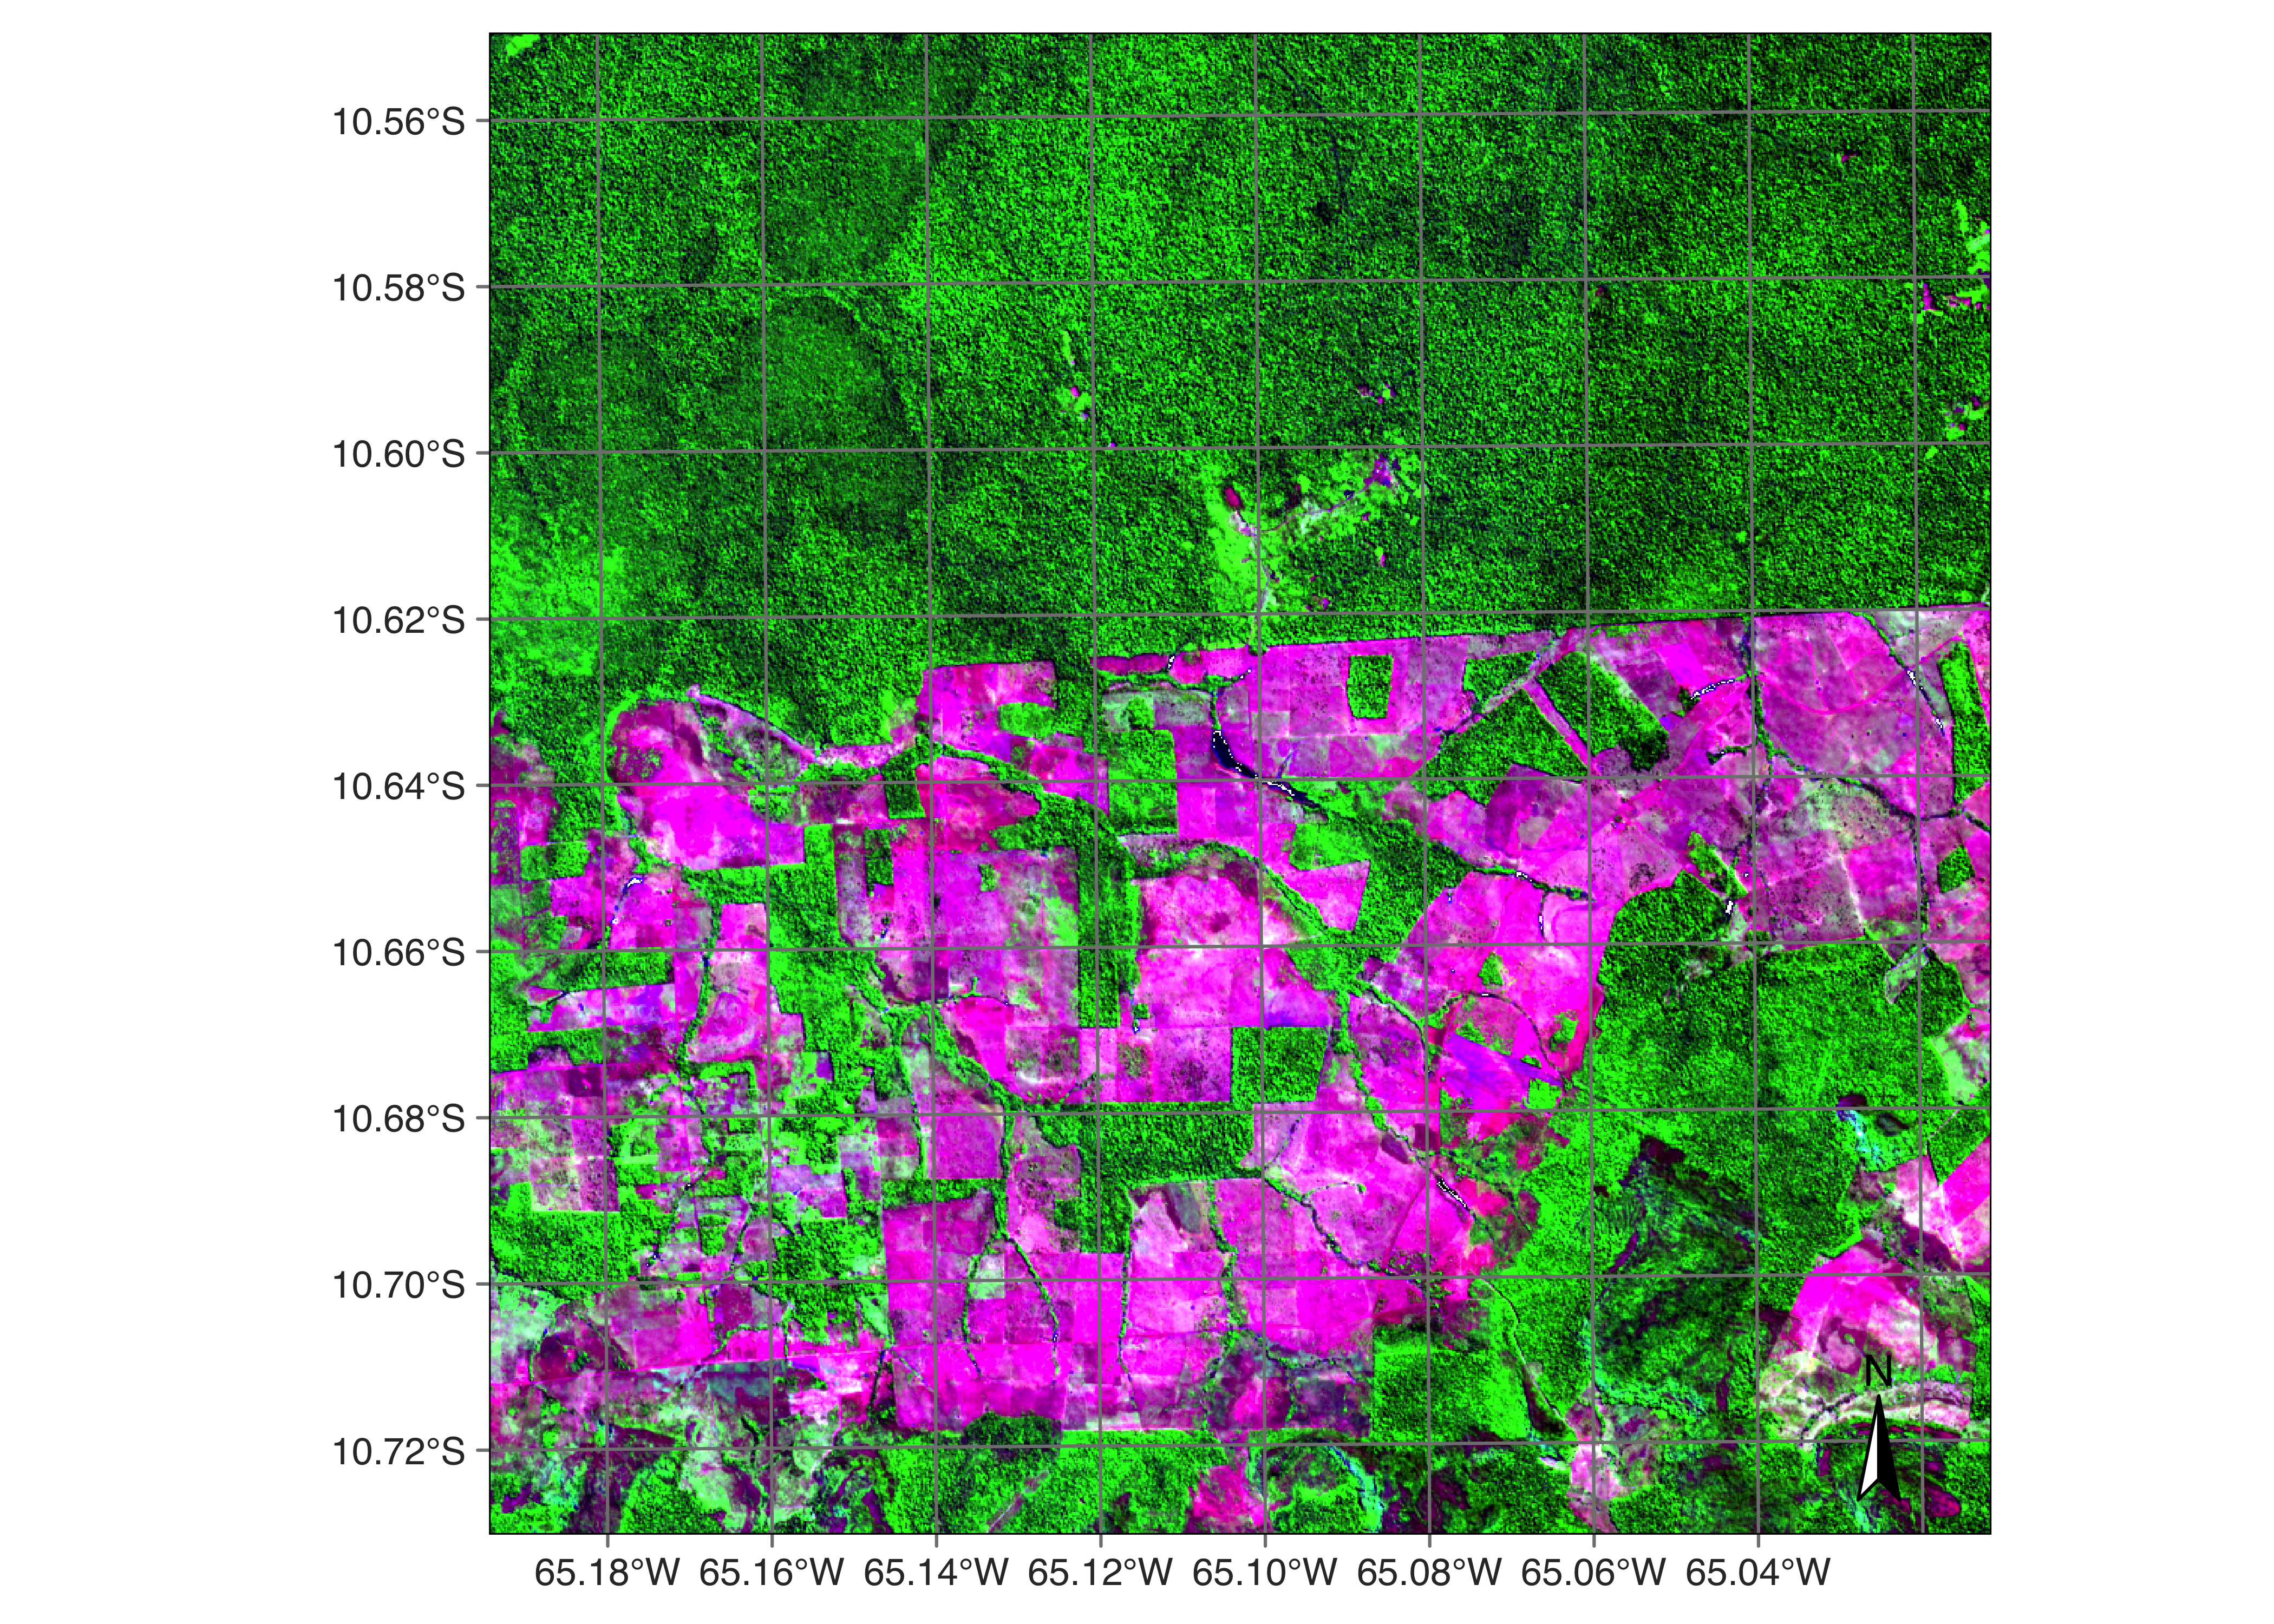 Sentinel-2 image over an area in Rondonia, Brazil (Source: Authors).